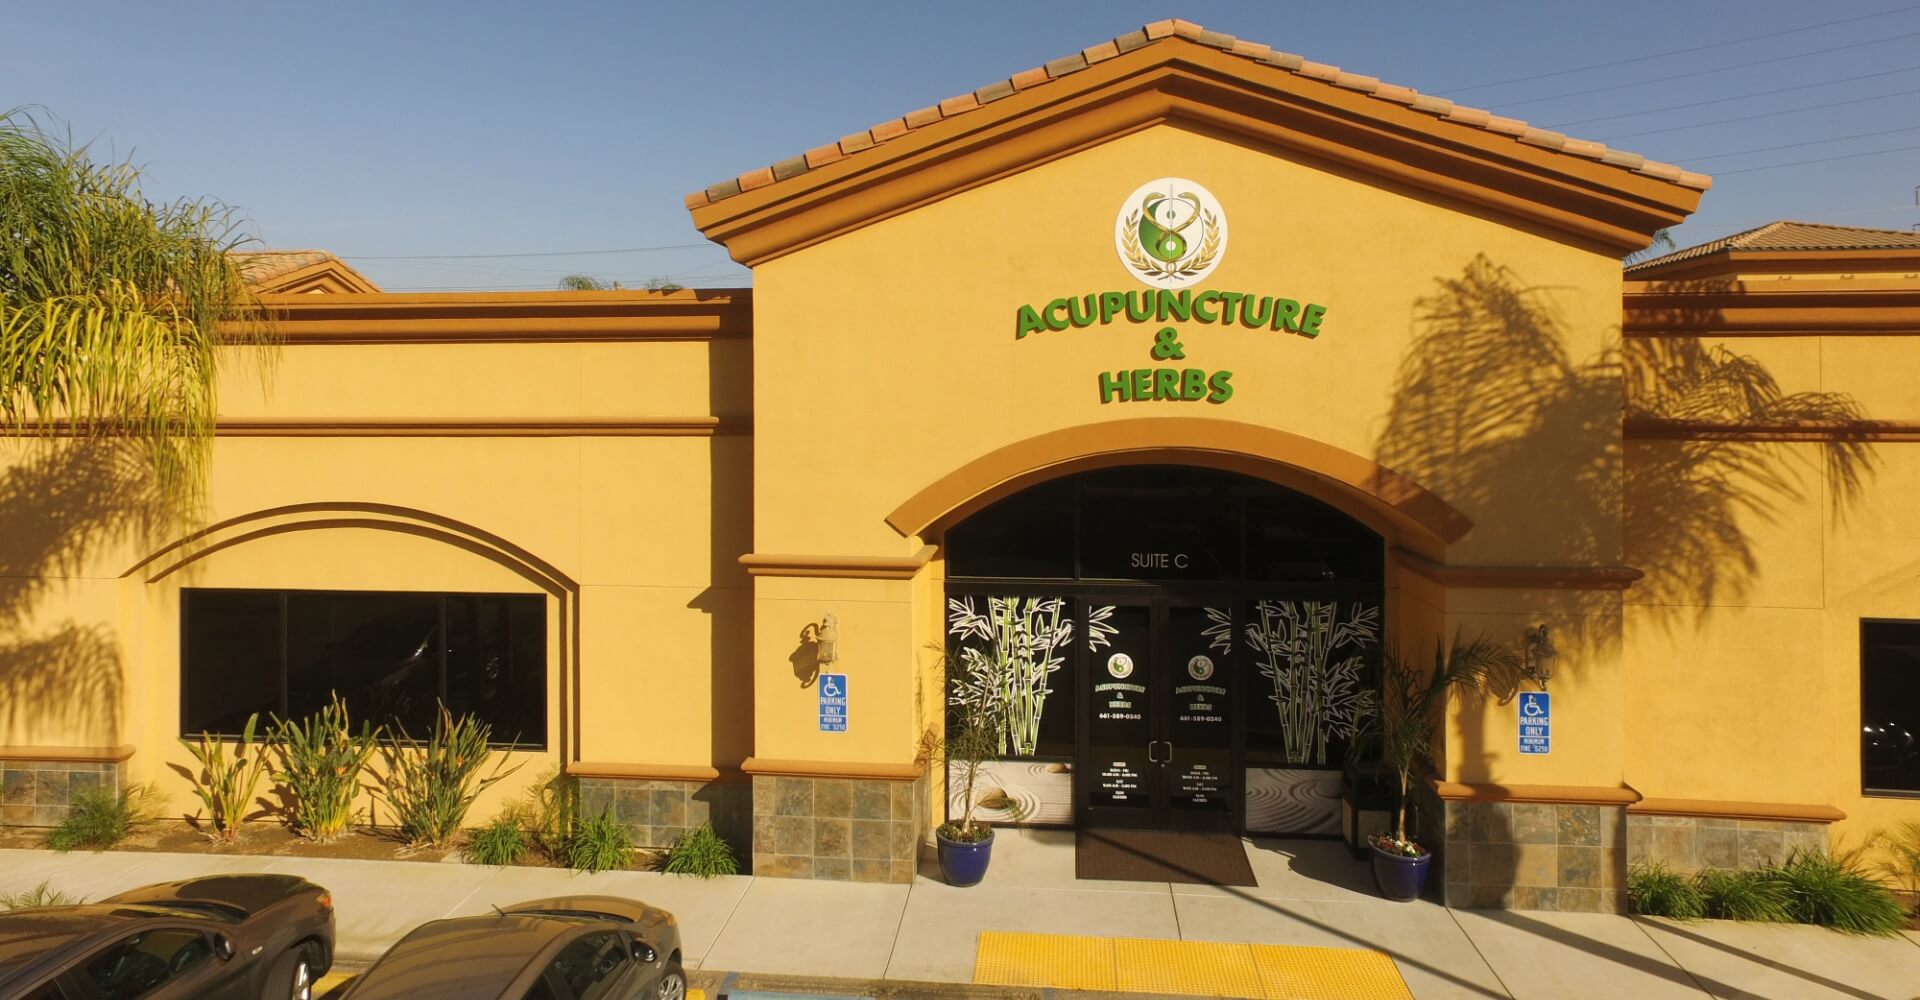 Acupuncture & Herbs Services Inc. In Bakersfield, Kings County